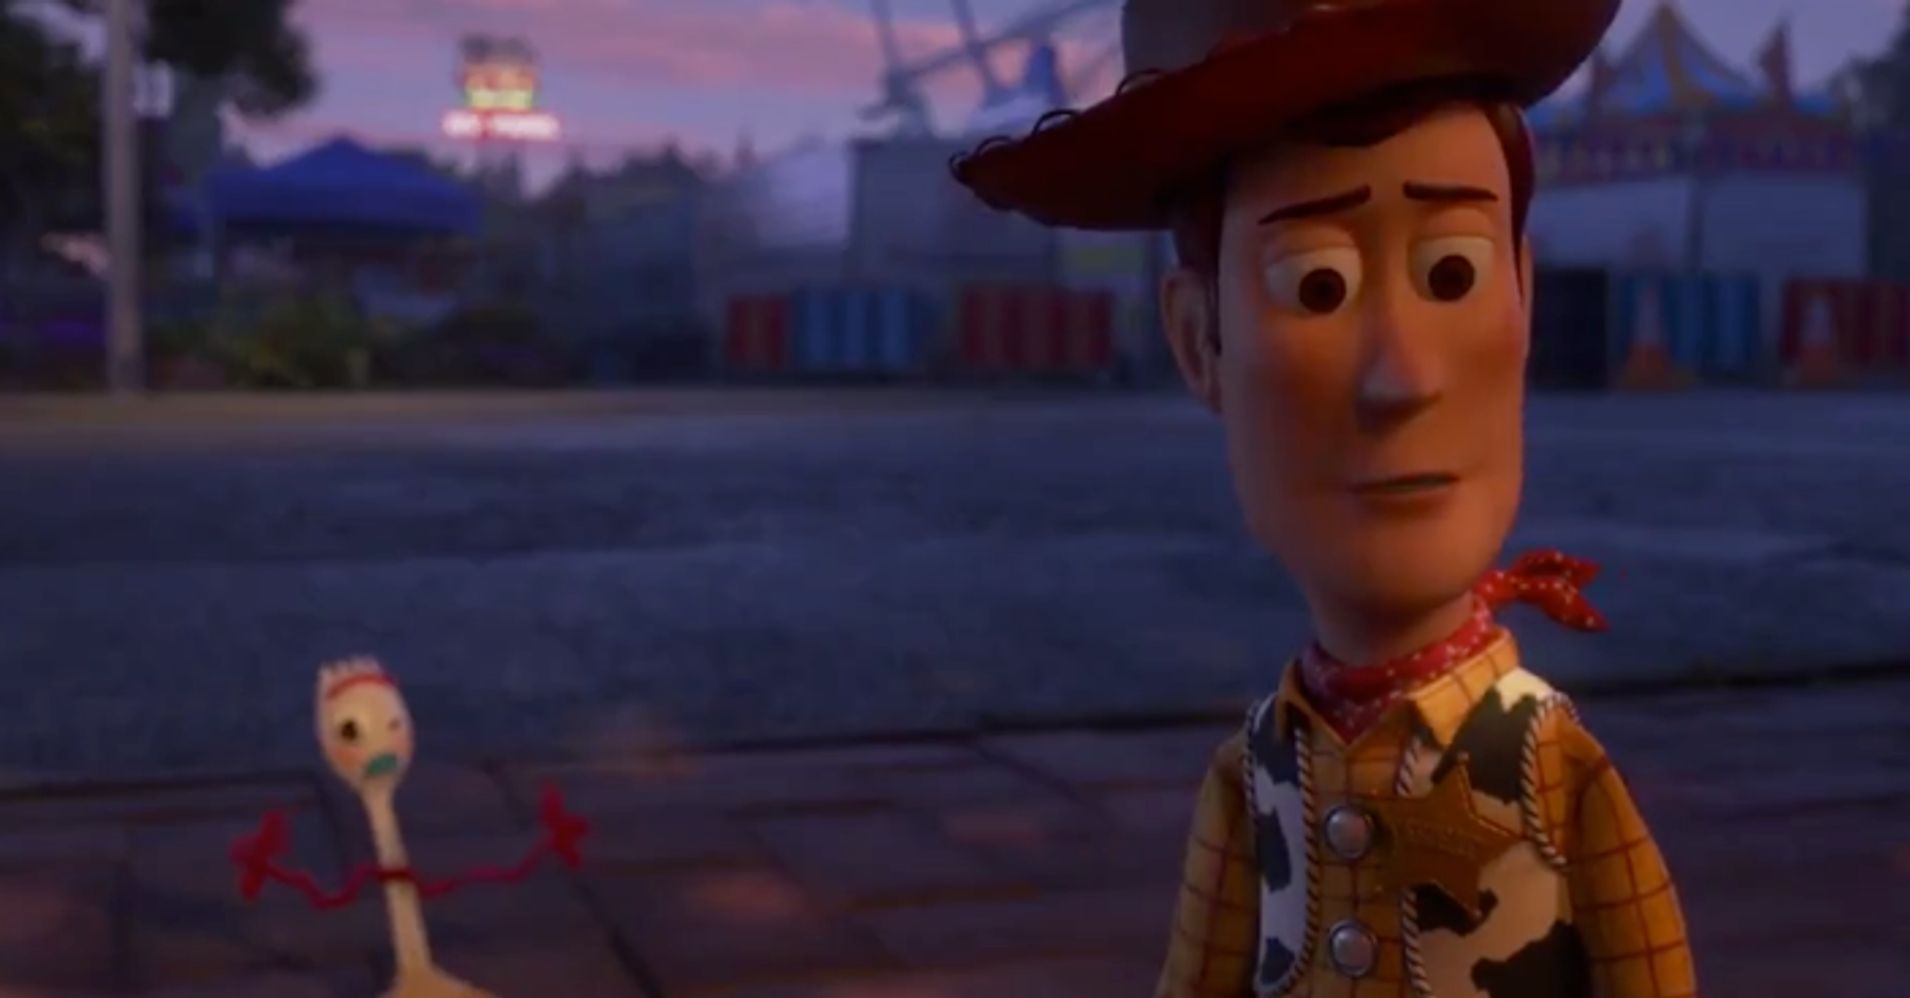 The Trailer For 'Toy Story 4' Dropped And Everyone's Already Crying